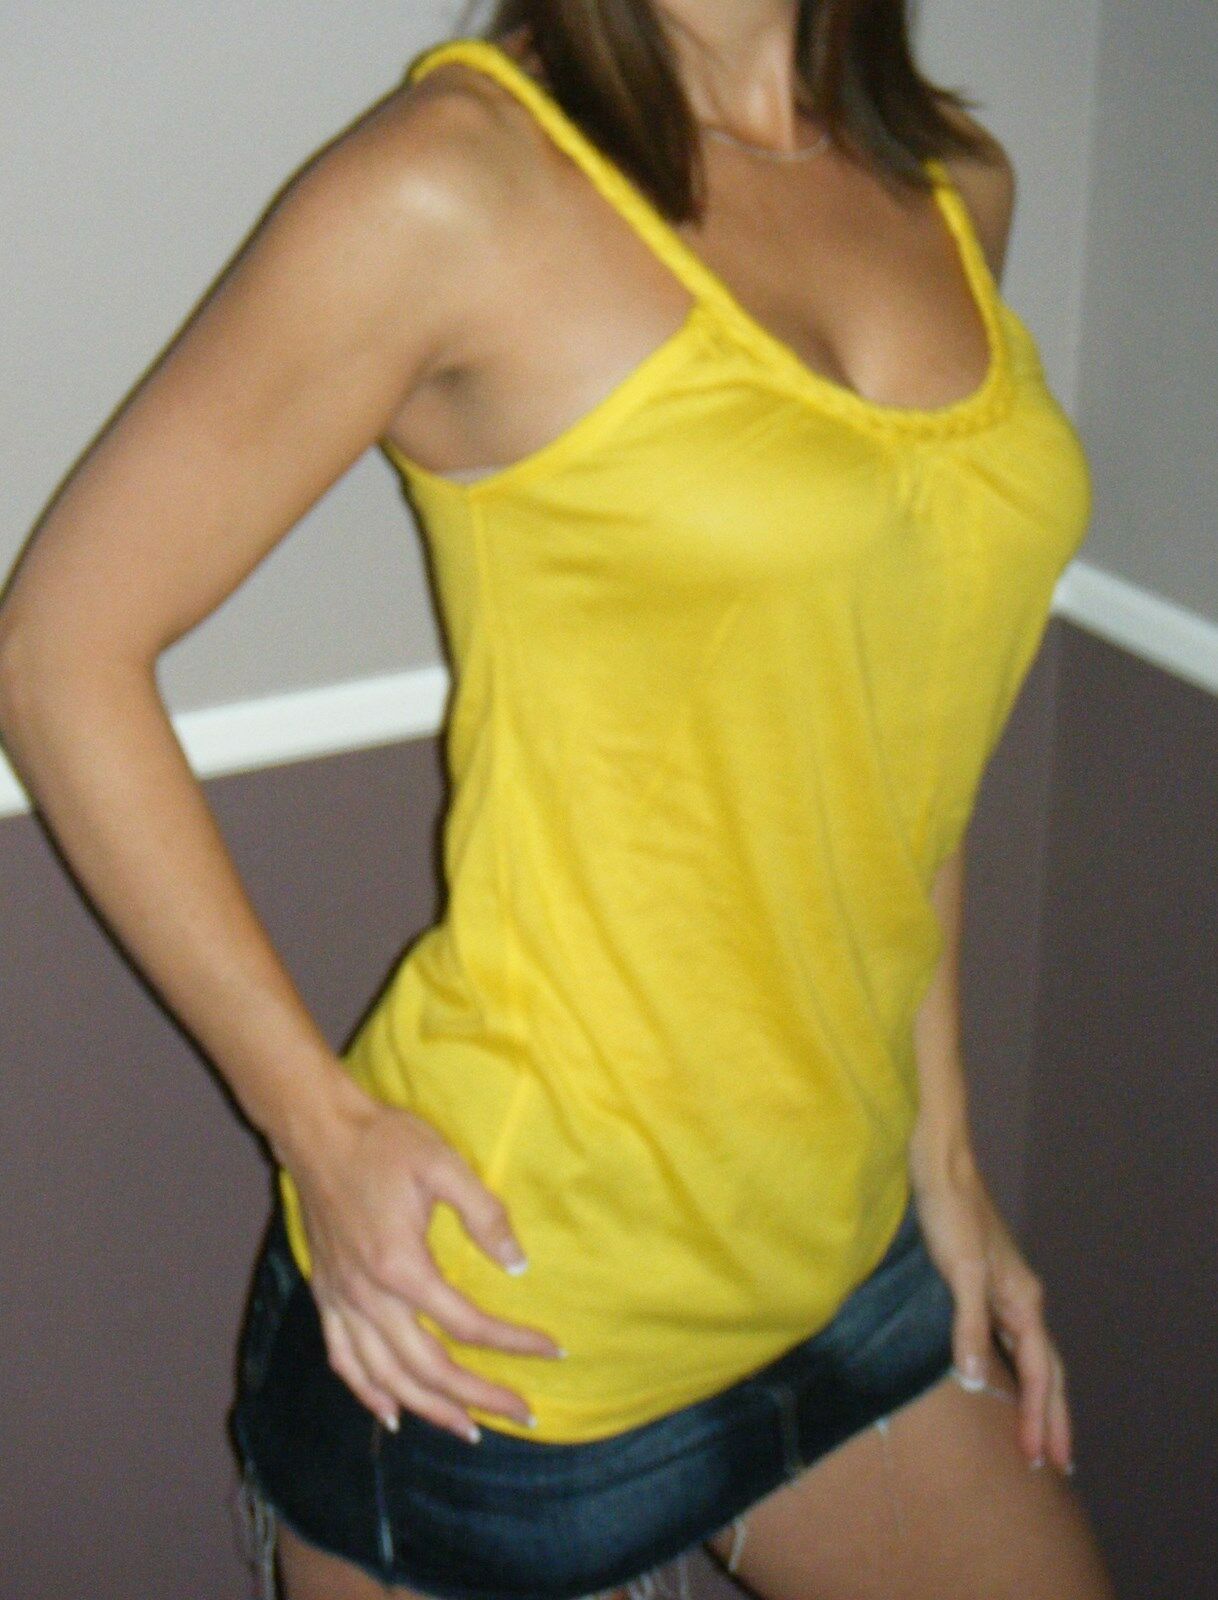 Very Sexy Low Cut Scoop Neck Braided Spaghetti Strap Tank Shirt Top Yellow S/M/L